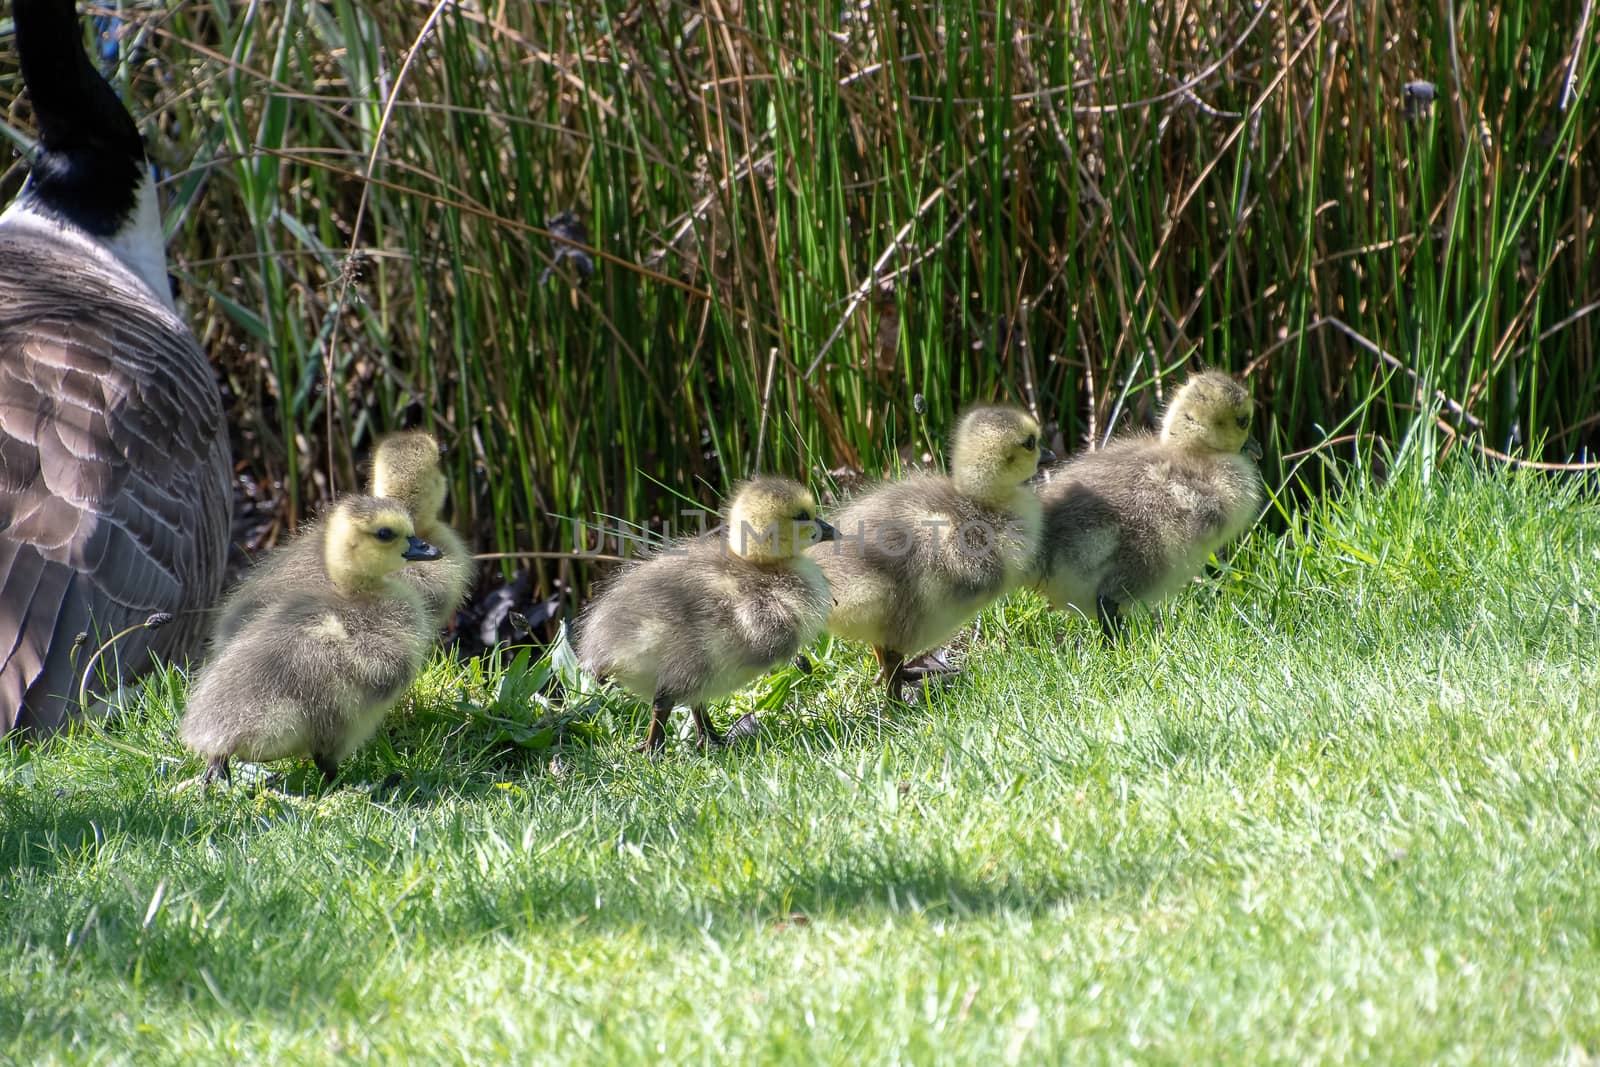 Baby goslings walking around on the grass by Russell102